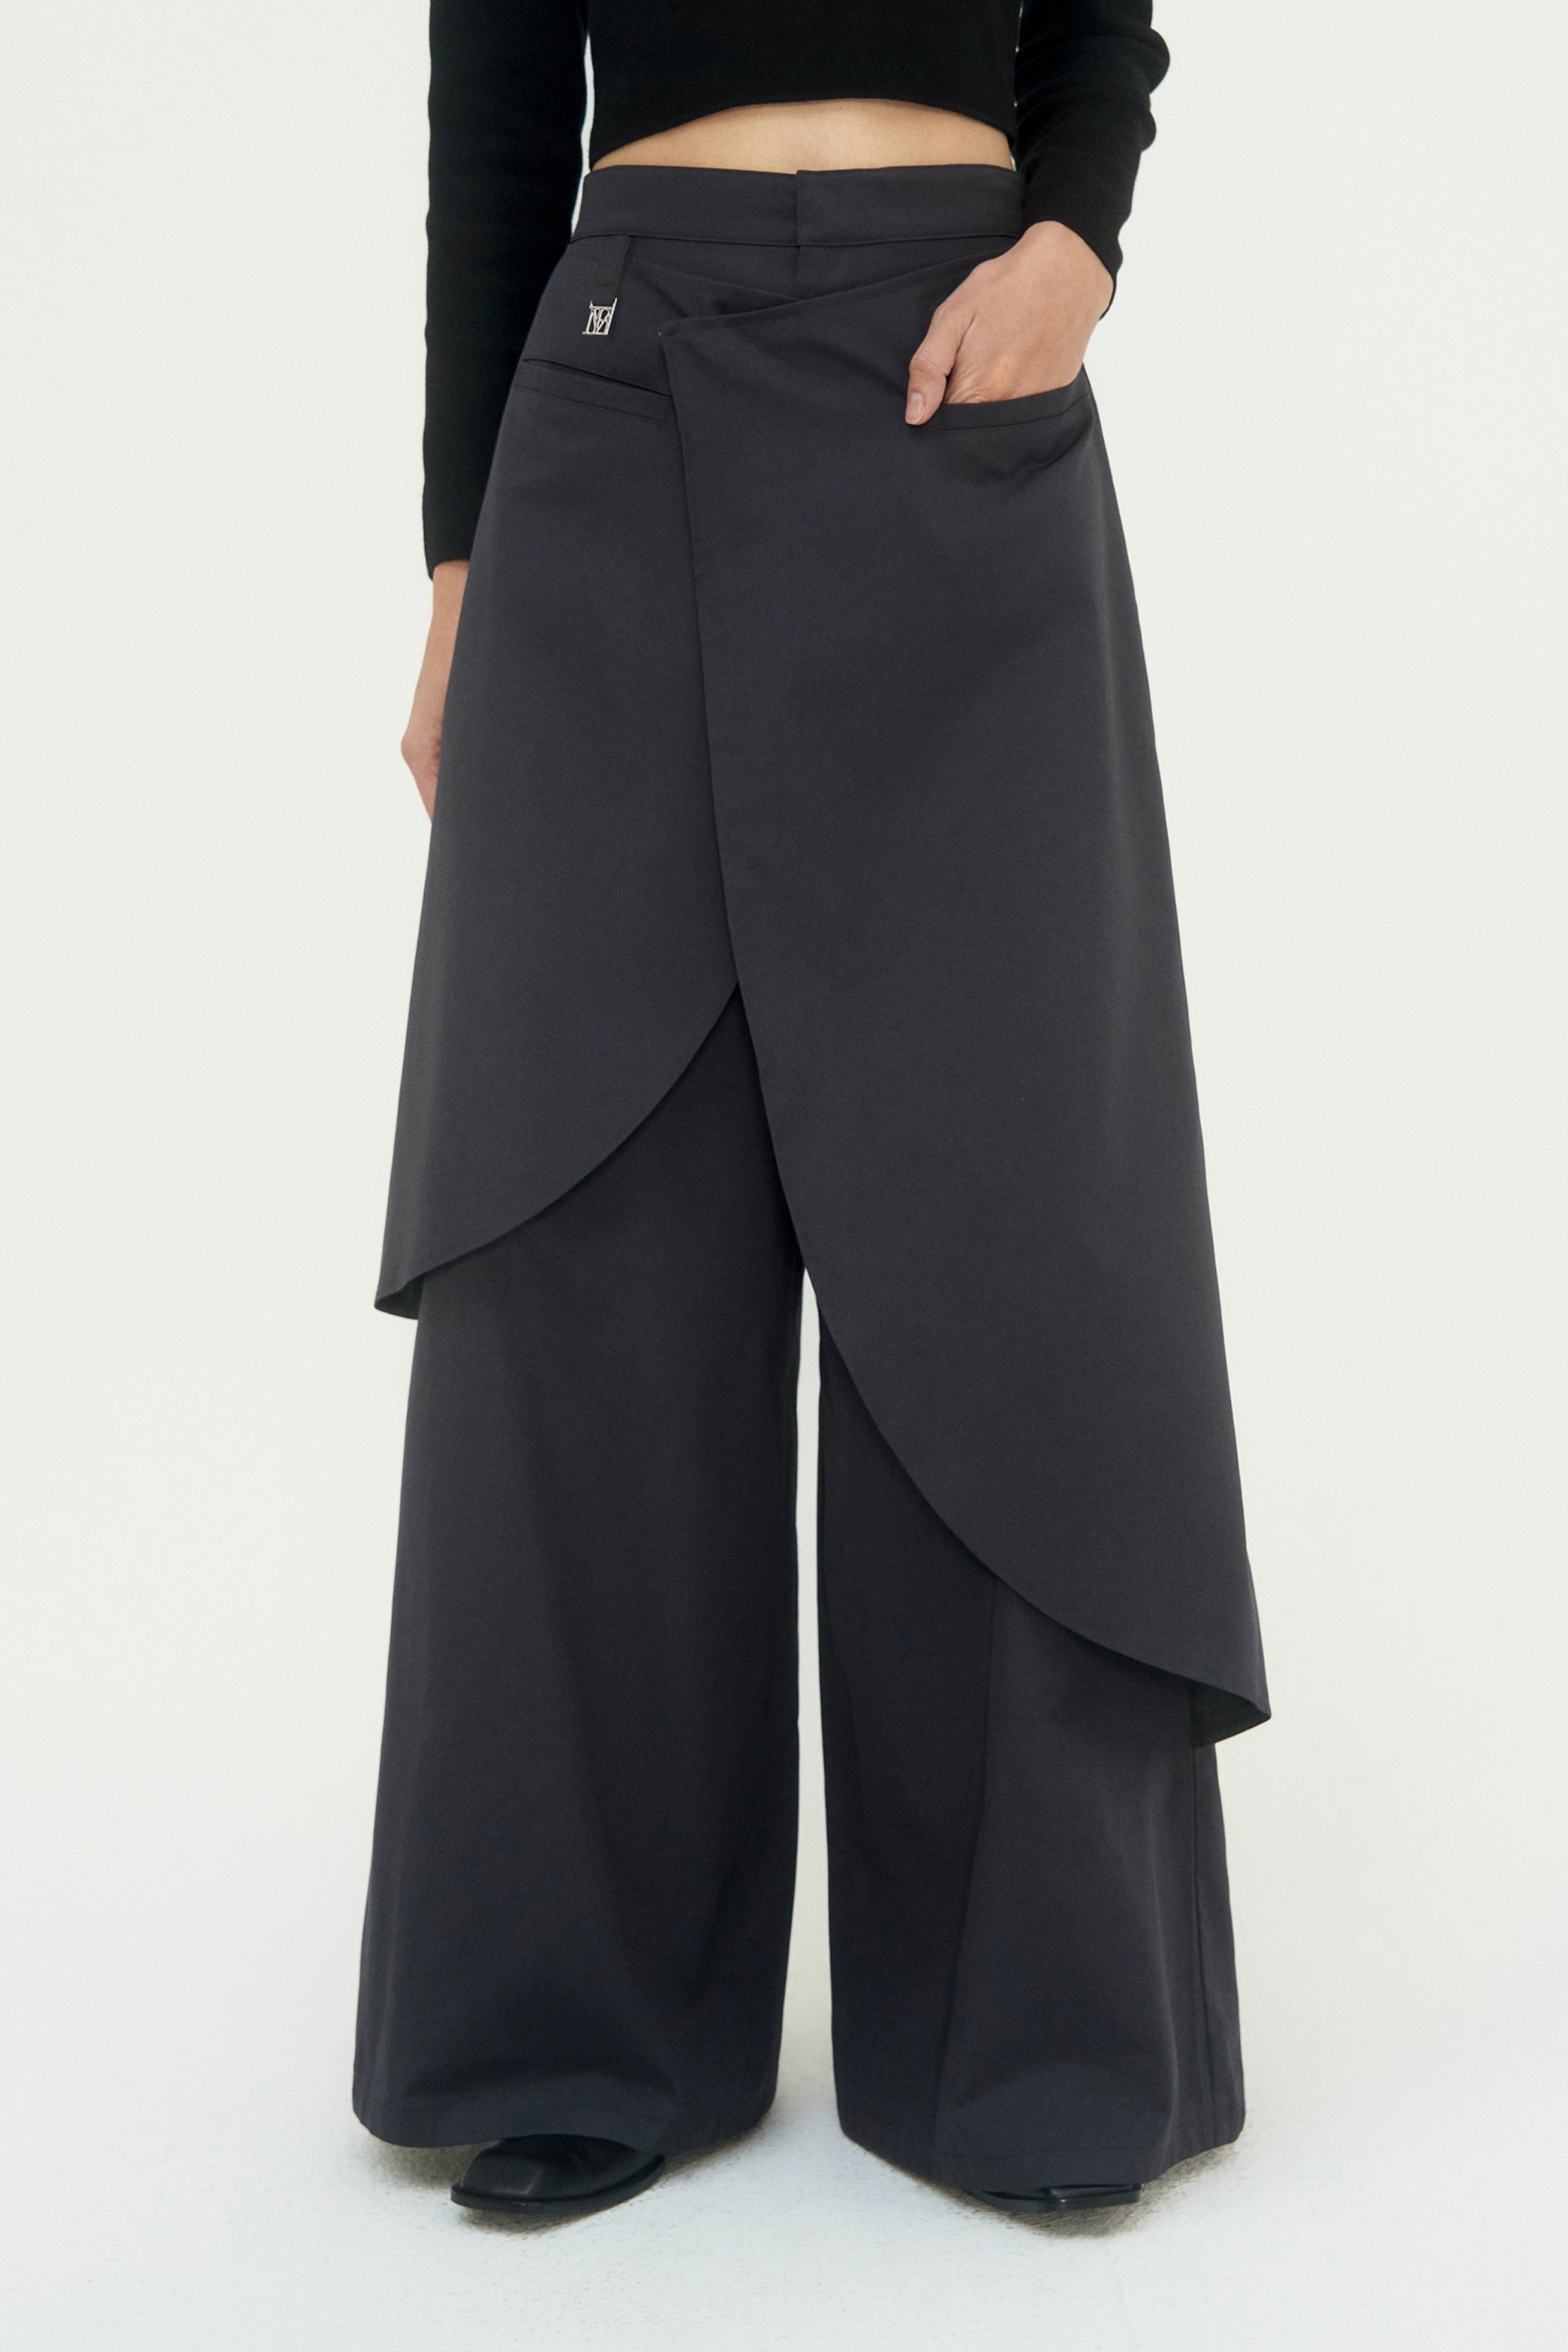 Wrap Double-layered Pants [ Charcoal ]